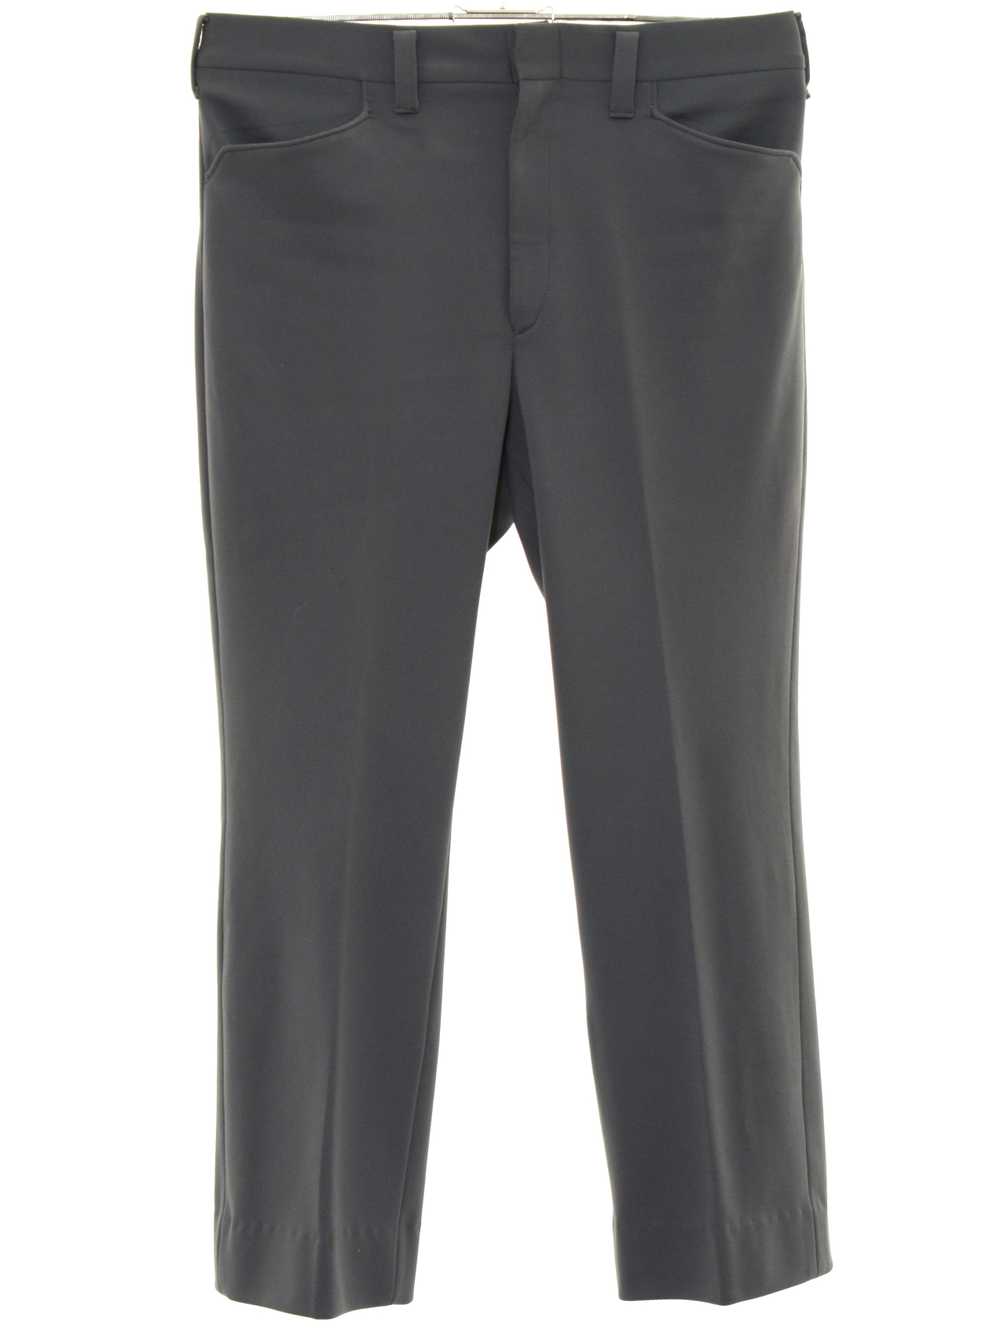 1970's Mens Flared Leisure Pants - image 1